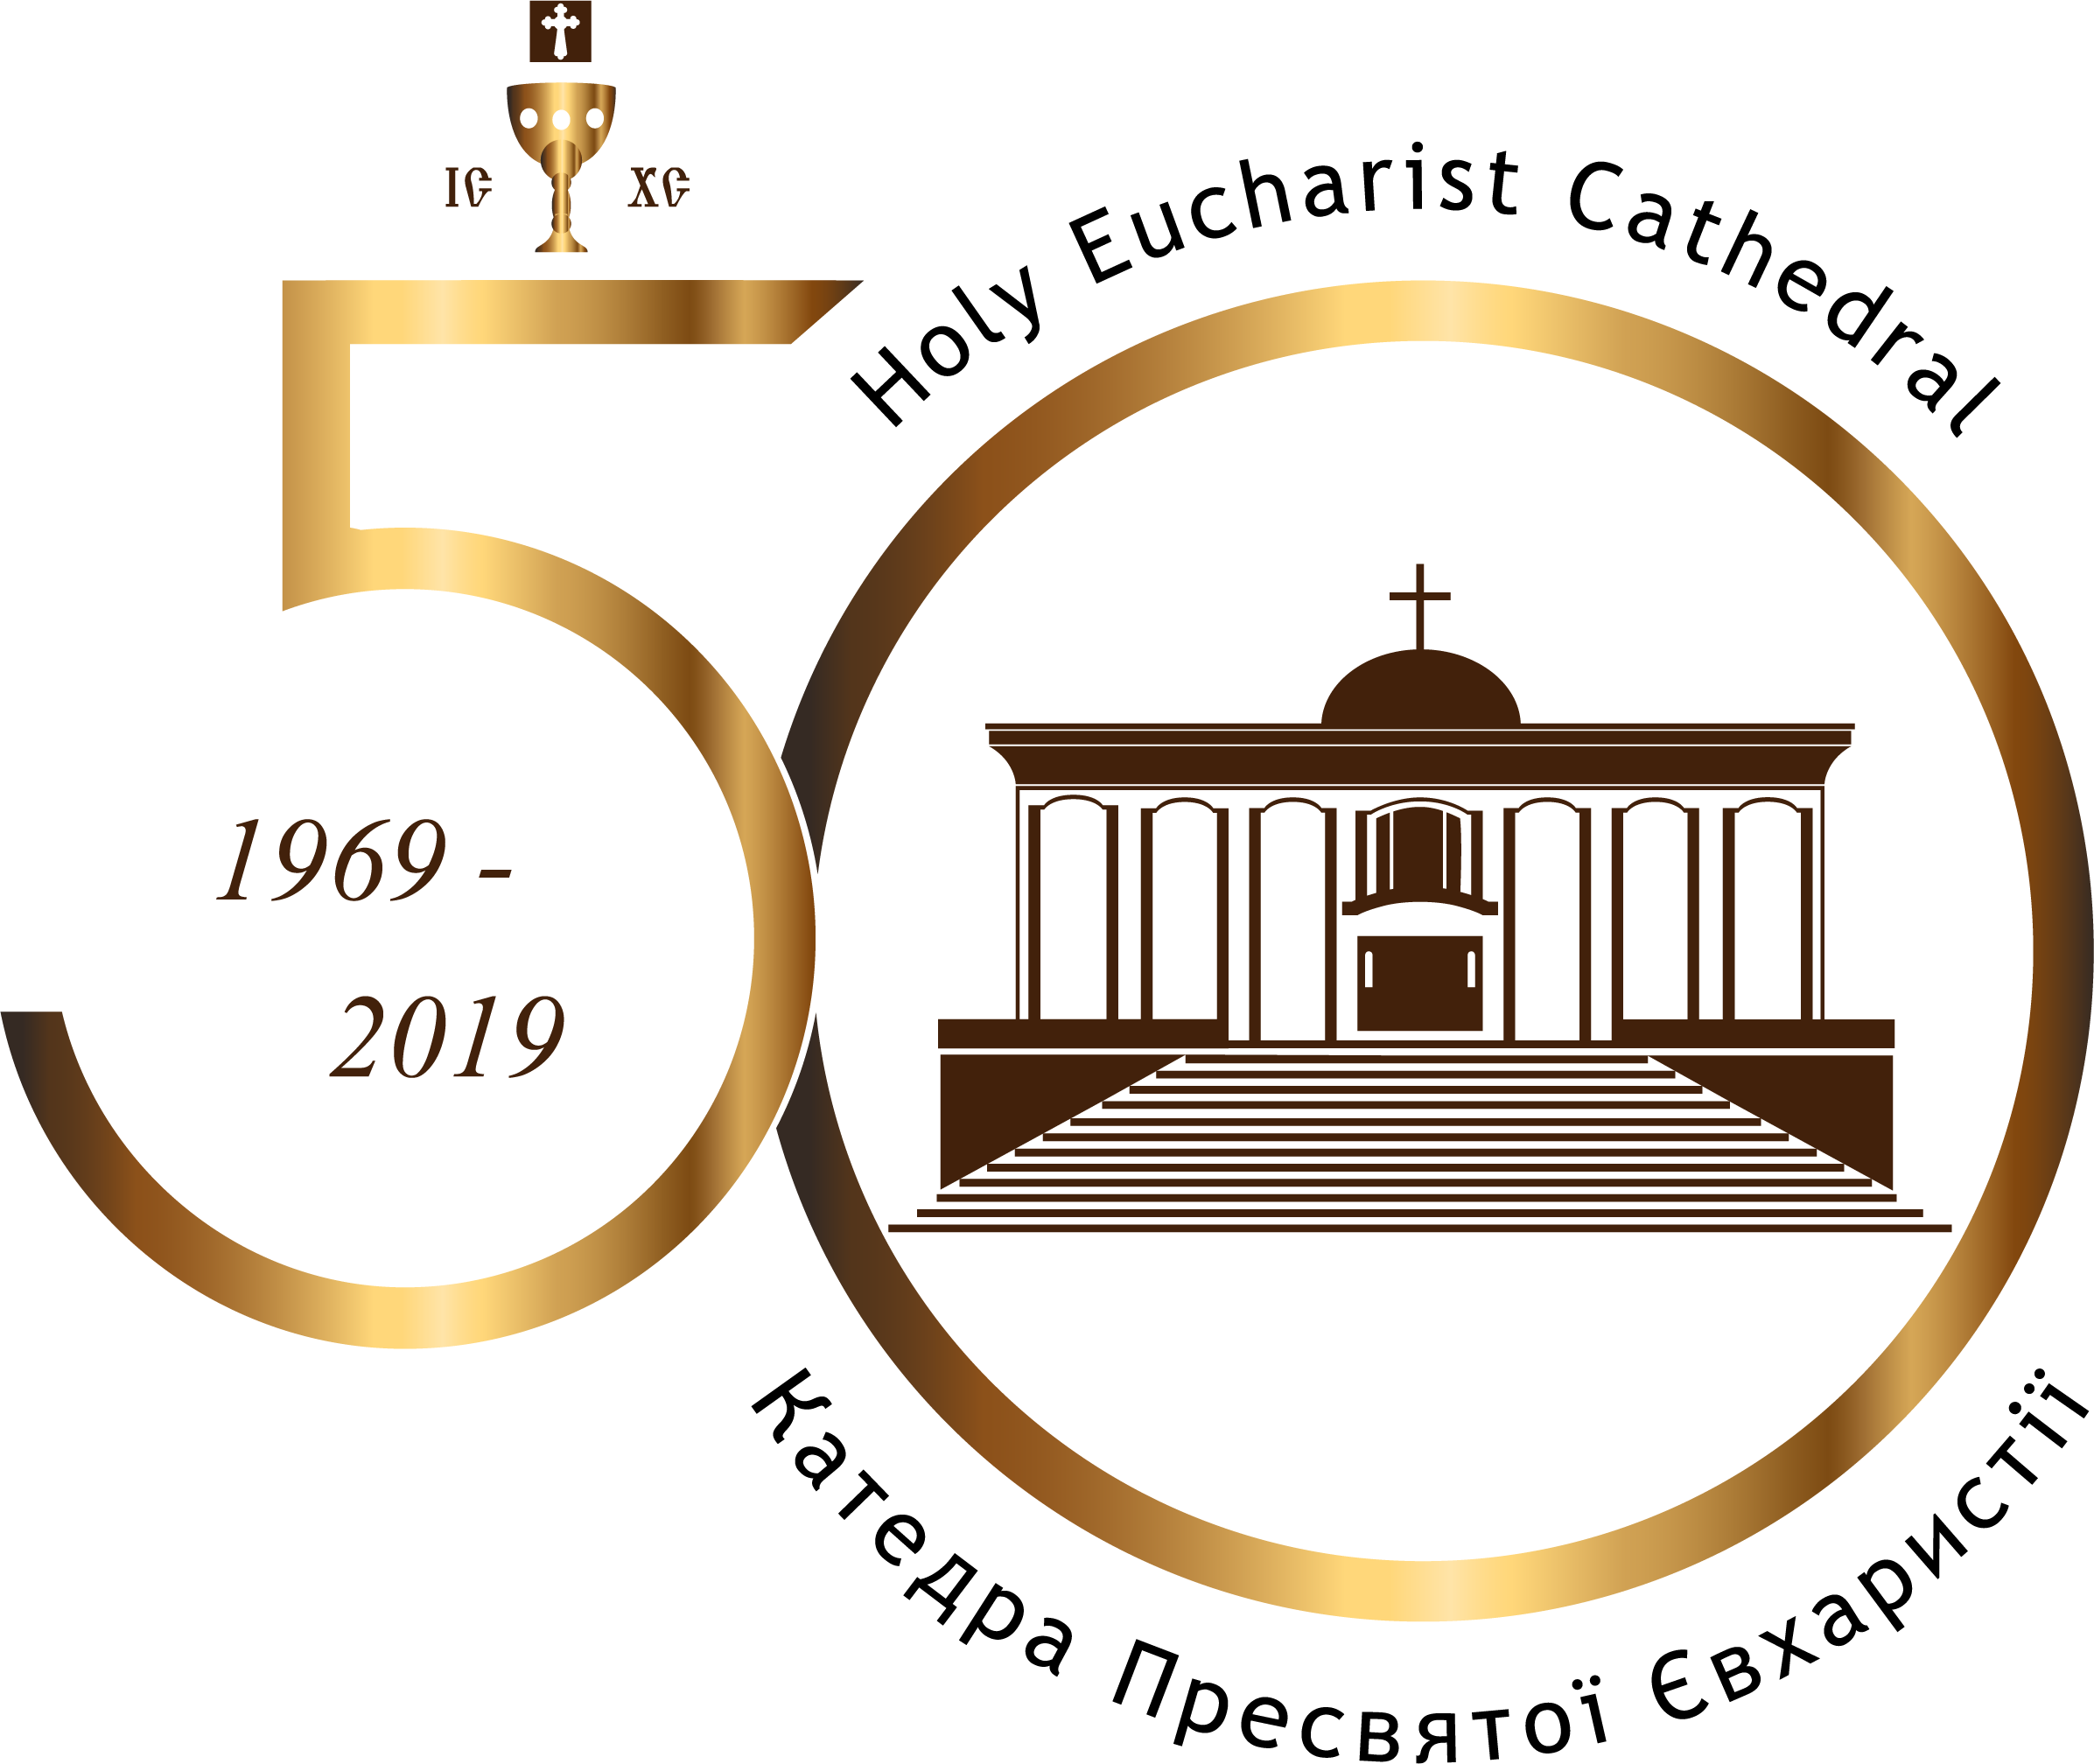 Holy Eucharist Cathedral logo